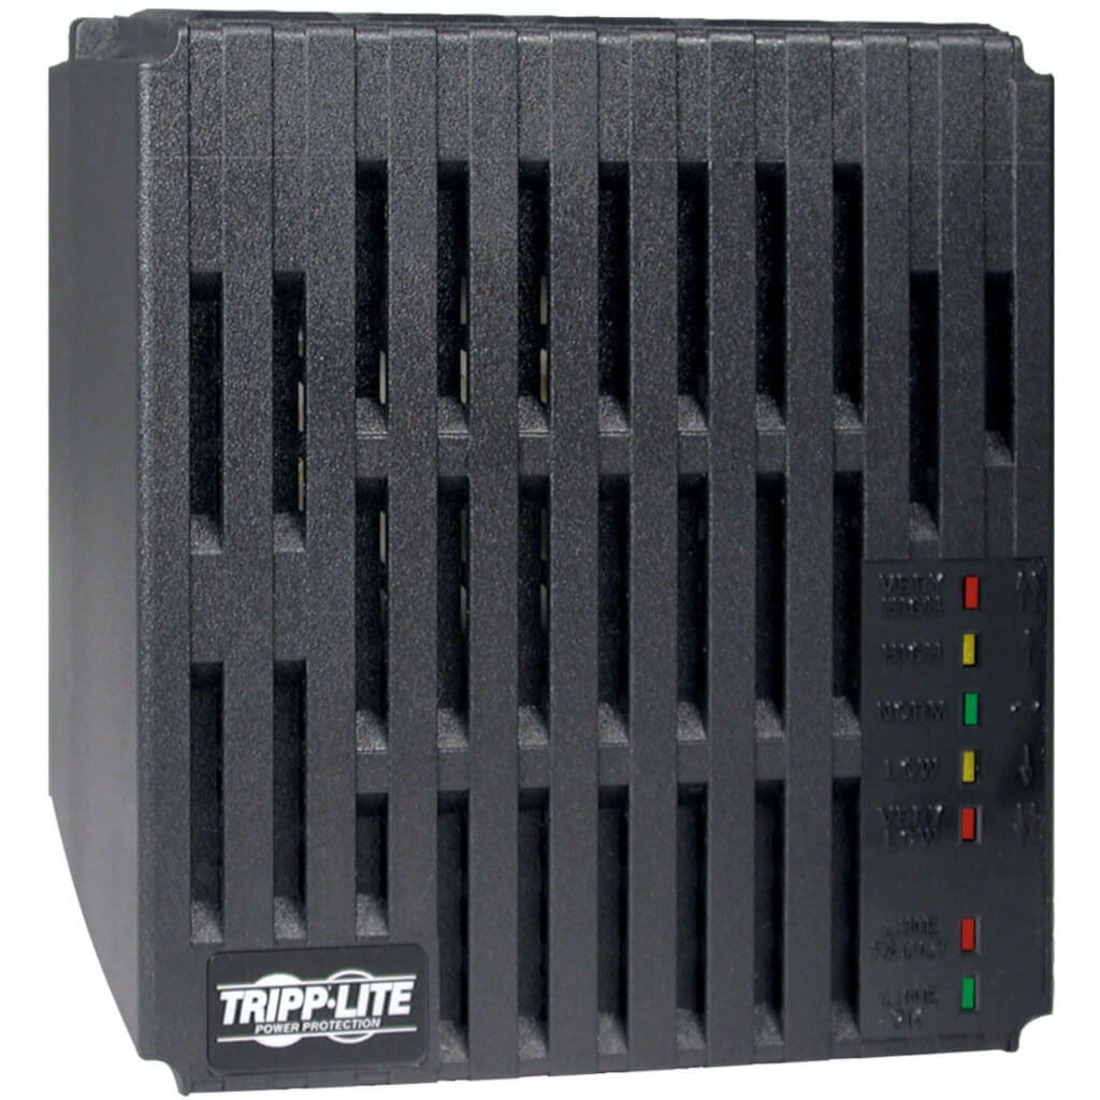 Tripp Lite 2400W Line Conditioner w/ AVR / Surge Protection 120V 20A 60Hz 6 Outlet 6ft Cord Power Conditioner